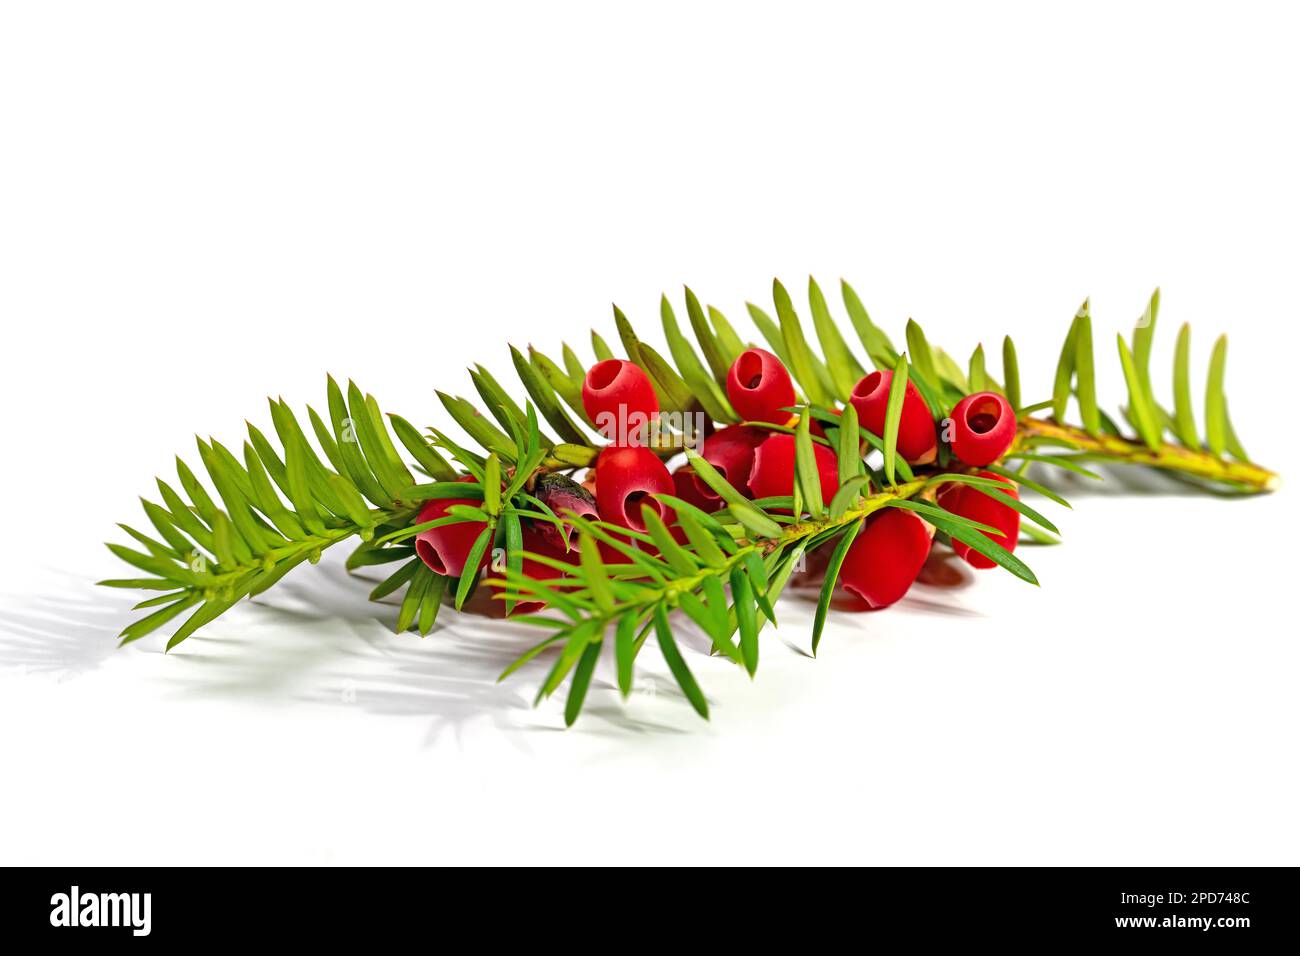 Fruits of the yew tree against a white background Stock Photo